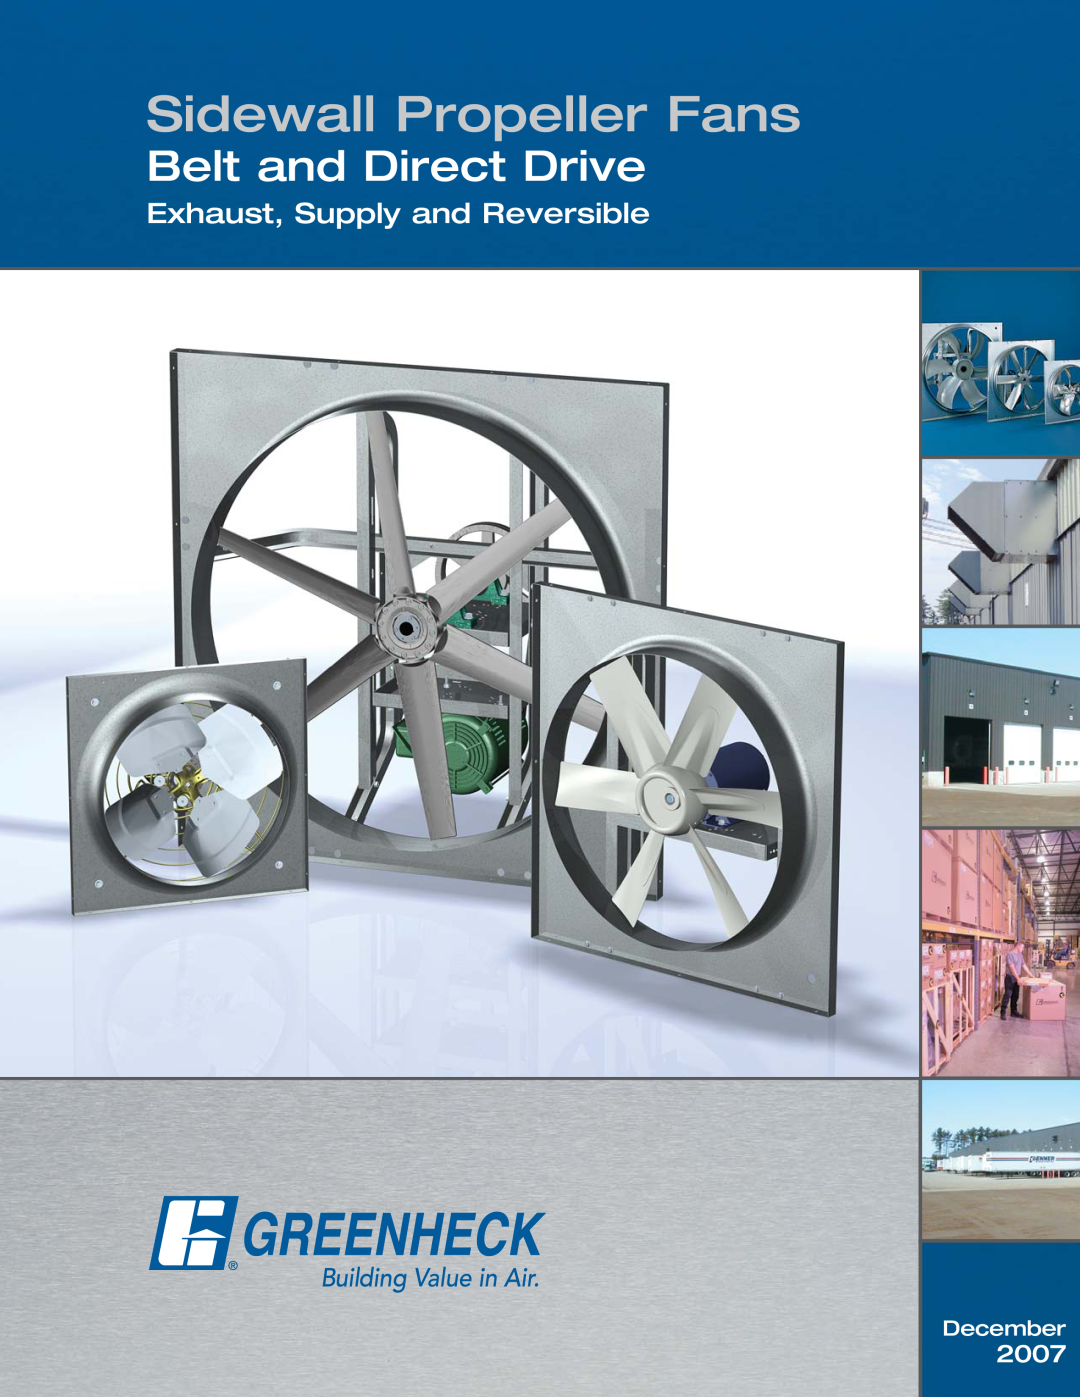 Greenheck Fan SE1 manual Exhaust, Supply and Reversible, Sidewall Propeller Fans, Belt and Direct Drive, 2007, December 